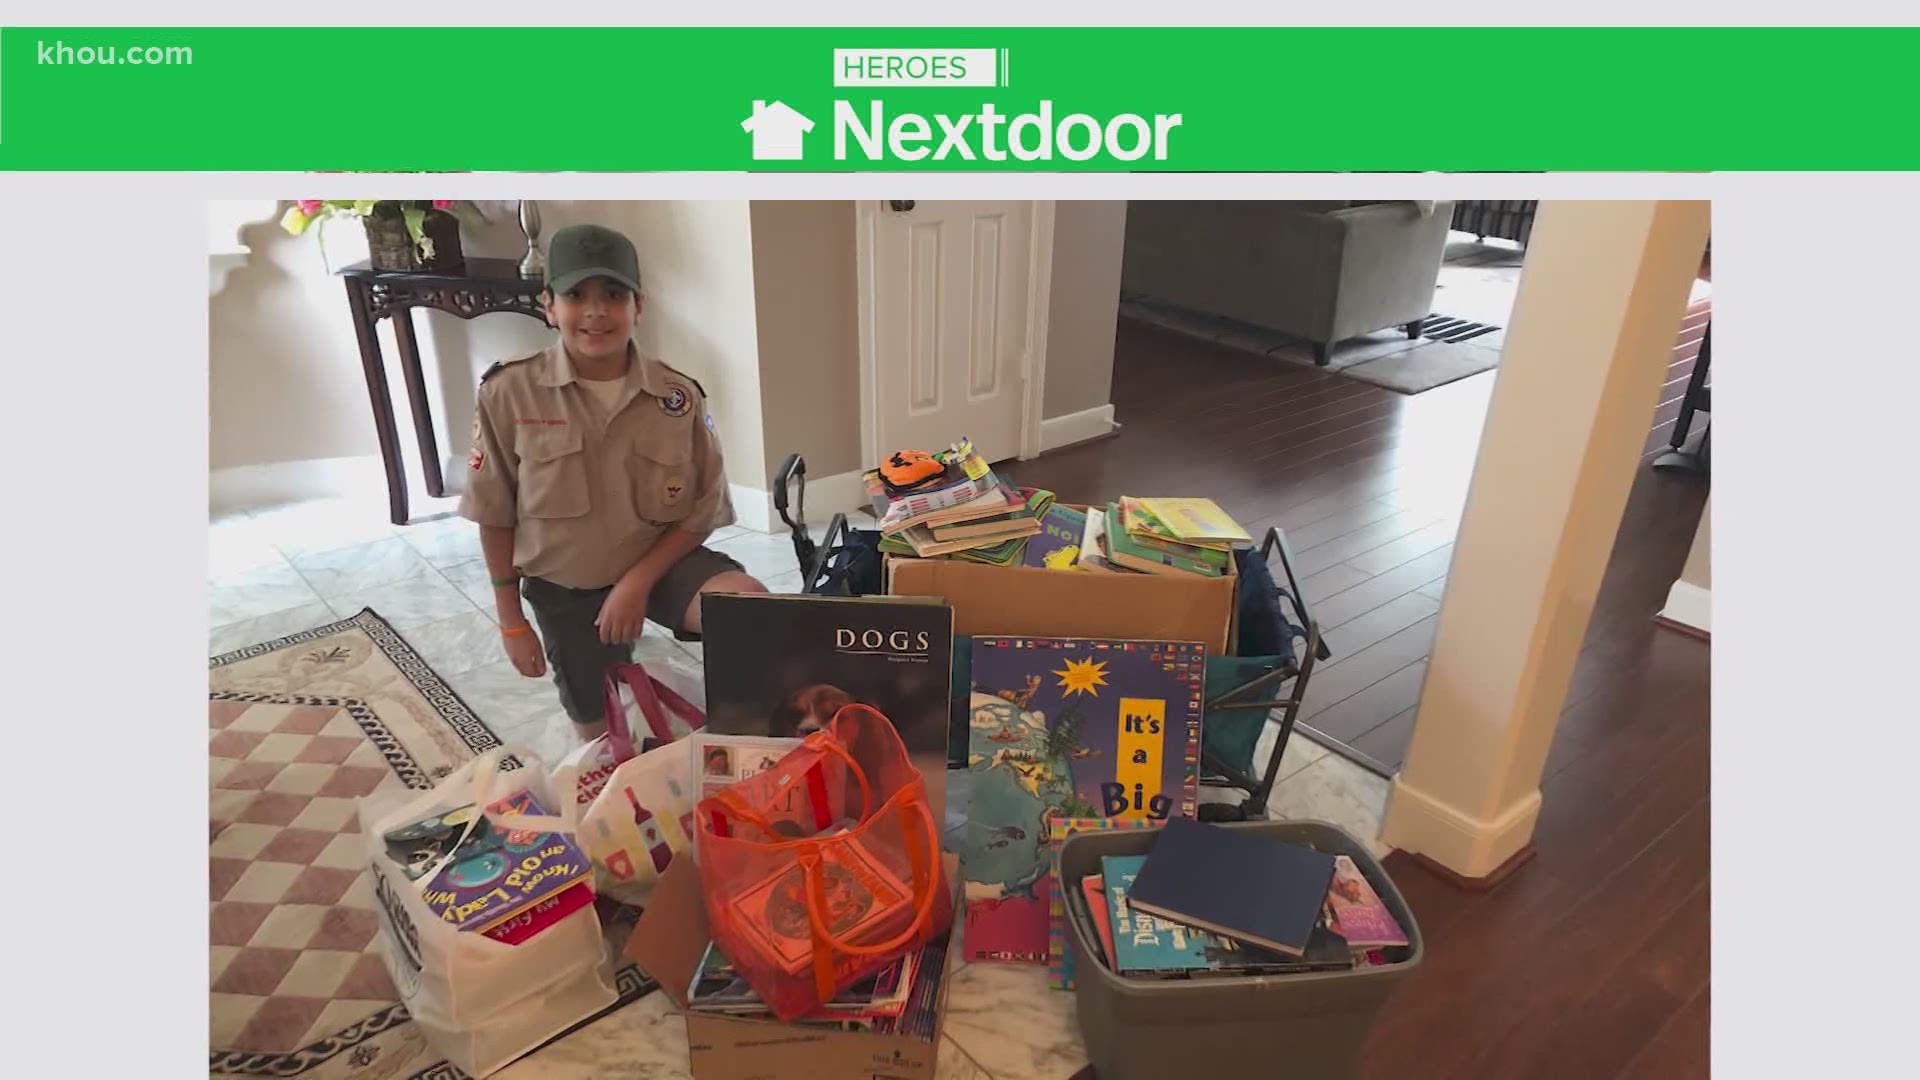 Marco Rost used Nextdoor to ask neighbors to donate books to his drive. He donated 500 books to Avance and earned a reading merit badge in the process.